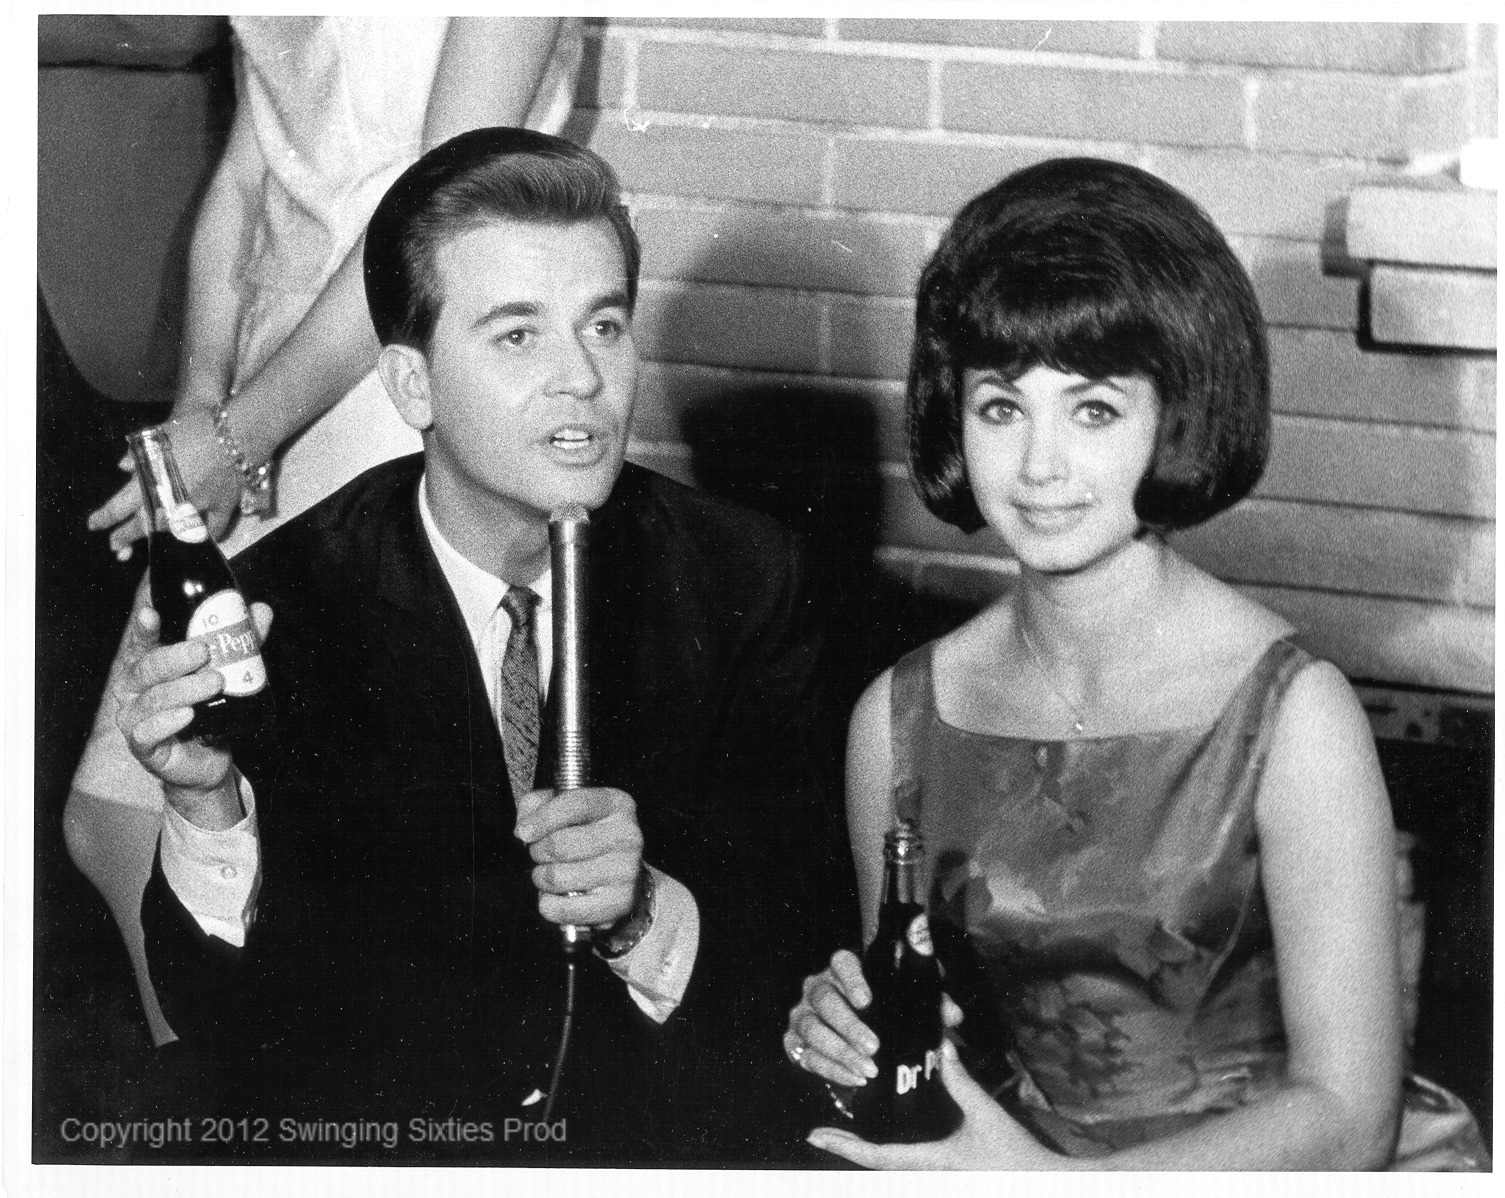 Donna Loren and Dick Clark co-hosting 